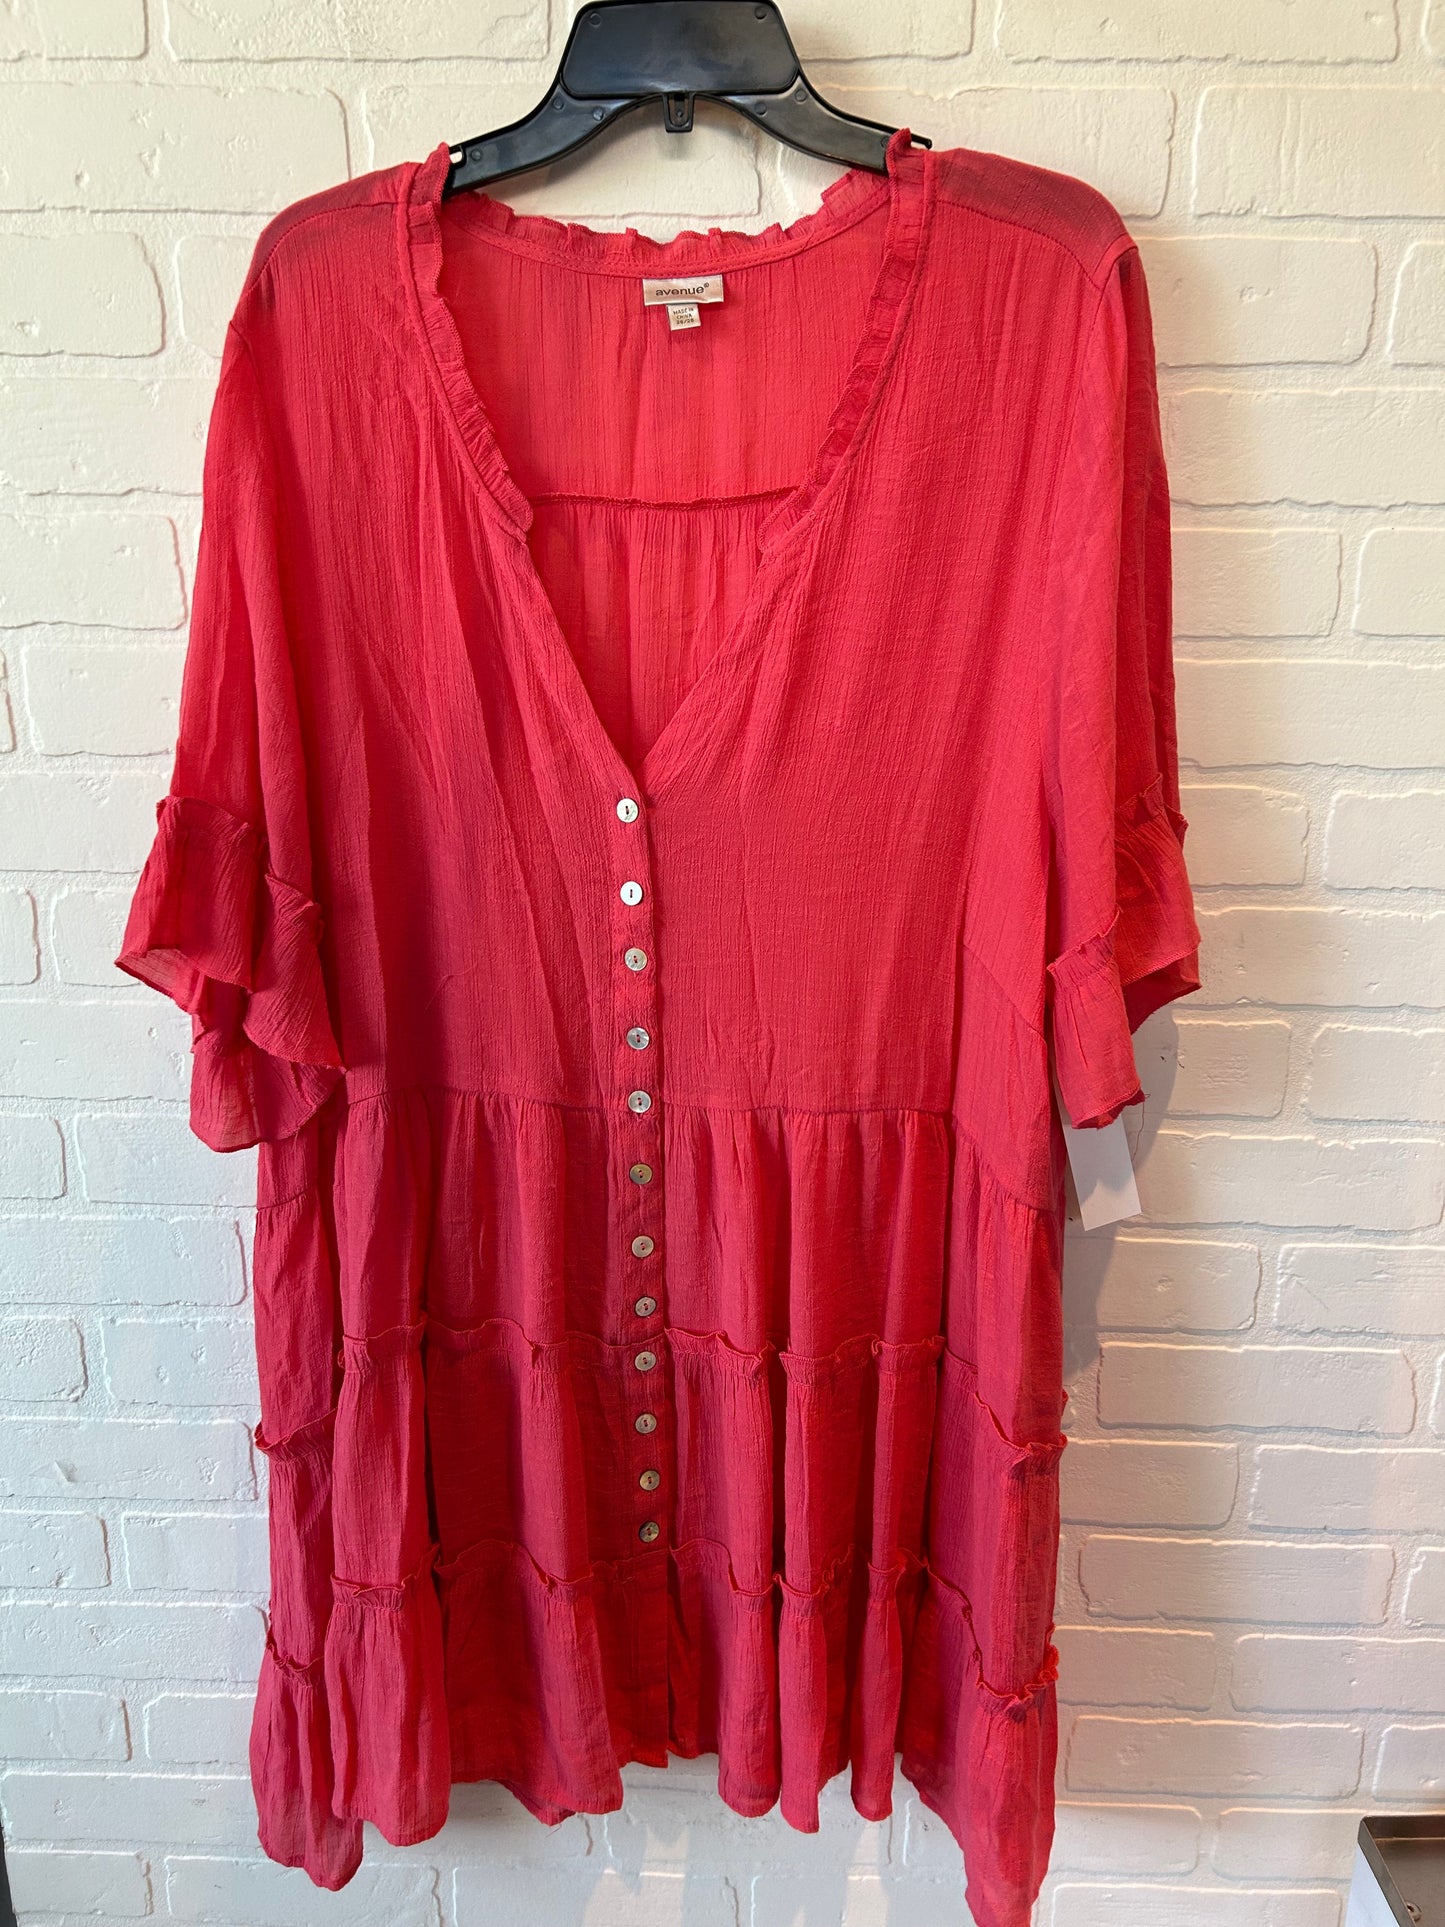 Pink Dress Casual Short Avenue, Size 4x